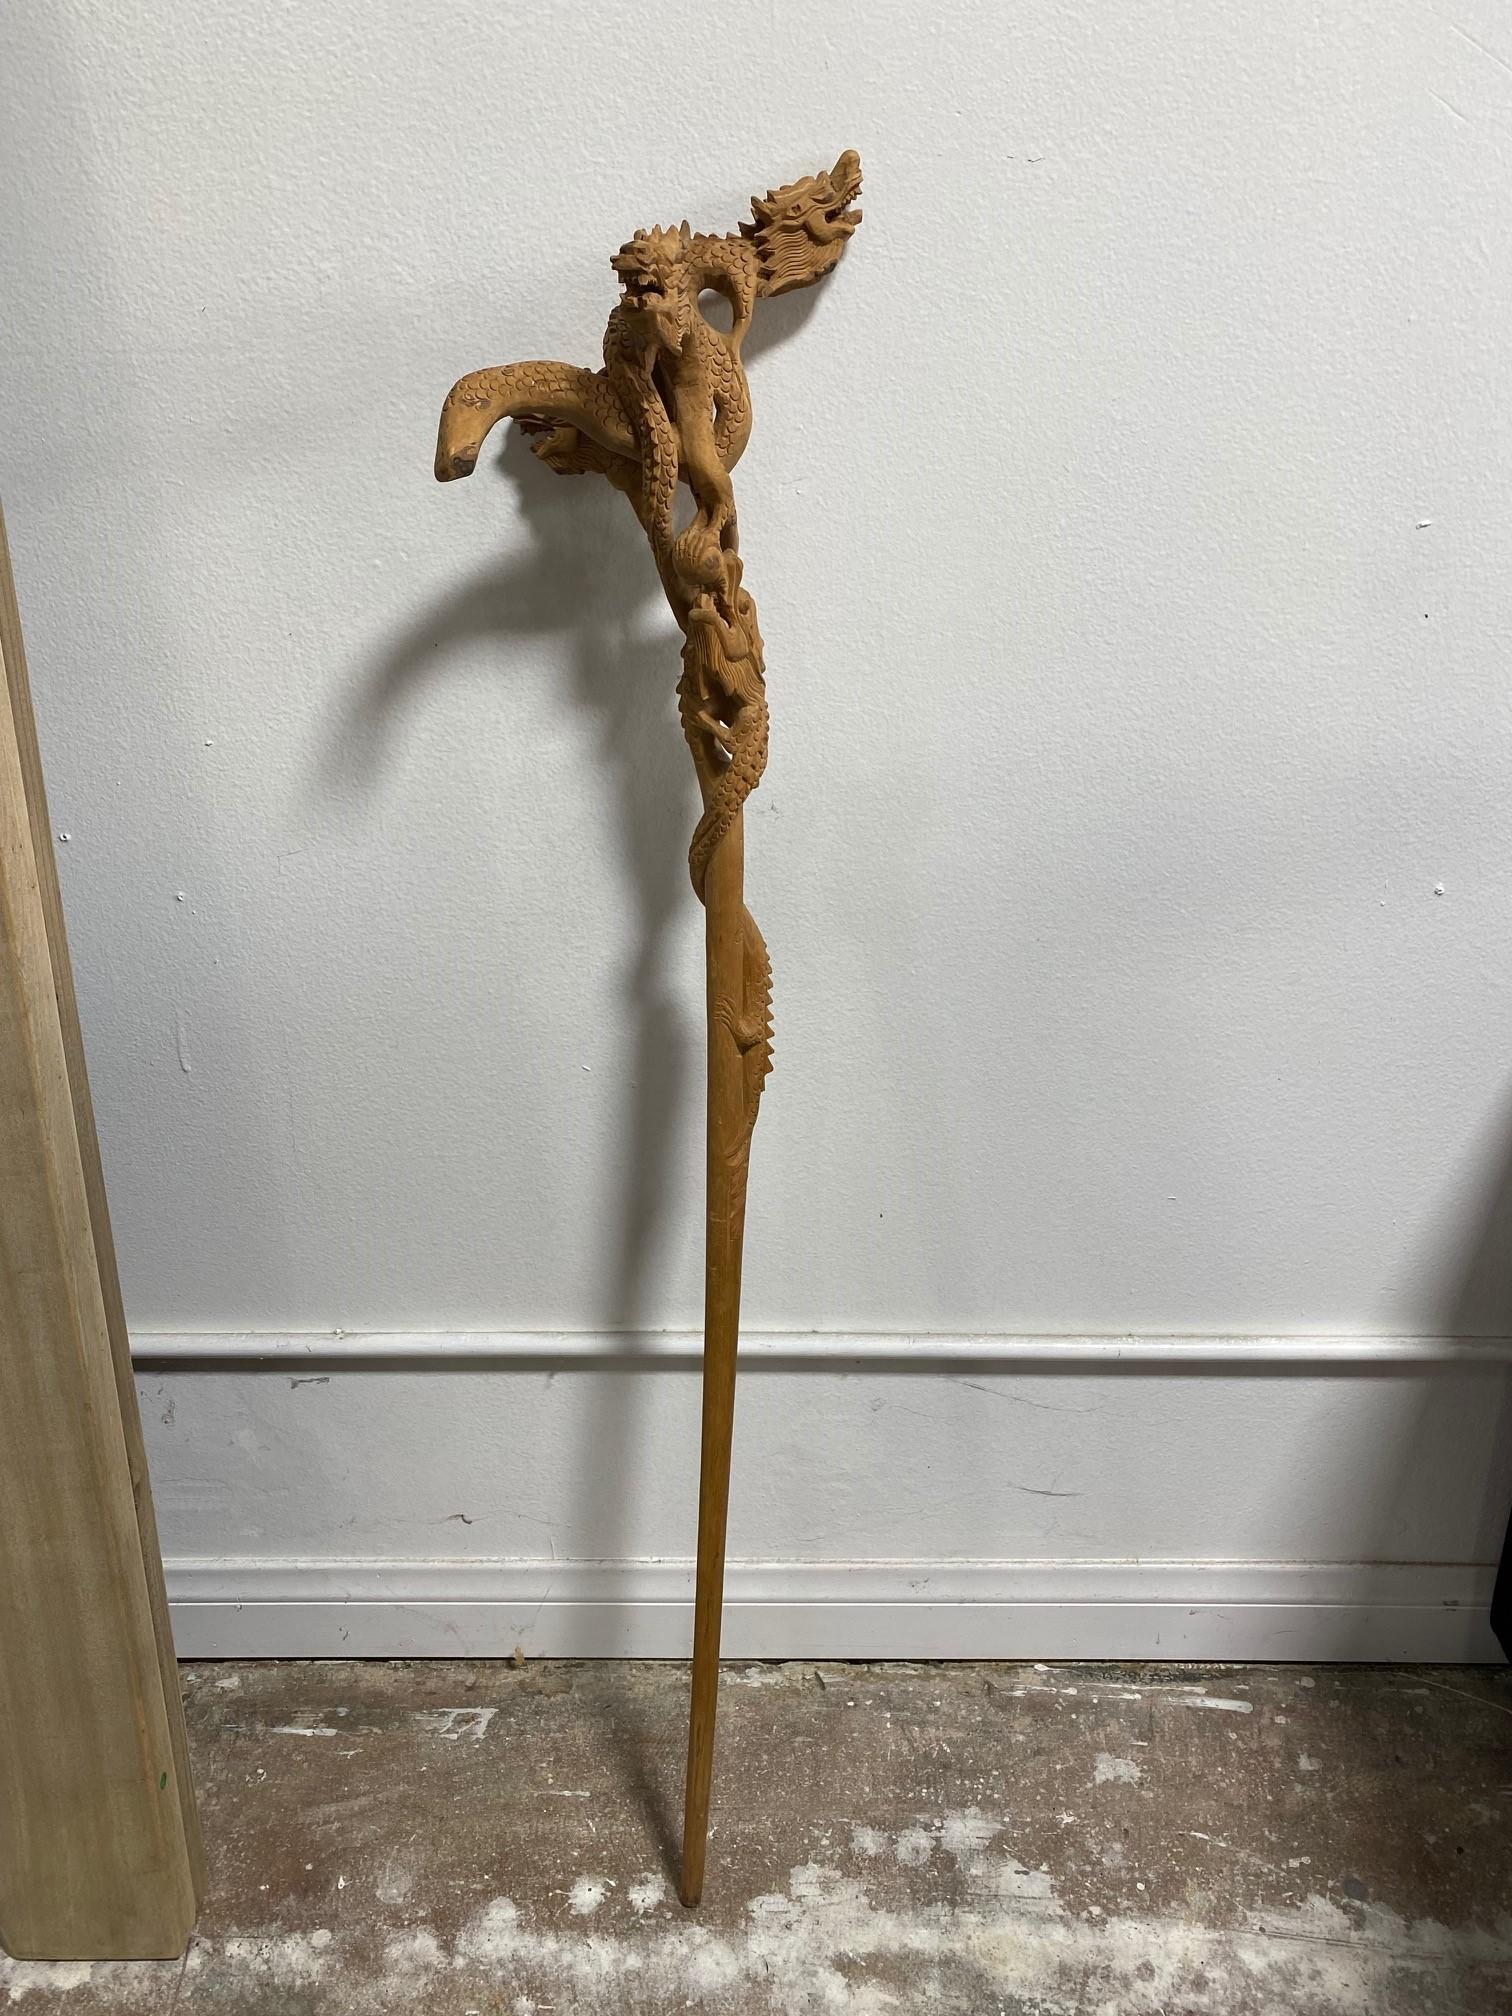 A rather fantastic and unusual walking stick/ cane. Hand carved from wood. Multi dragon heads. We have not seen another quite like it. 

Has a great feel and clearly unique look. 

A unique piece to add to your collection.

Dimensions: 44